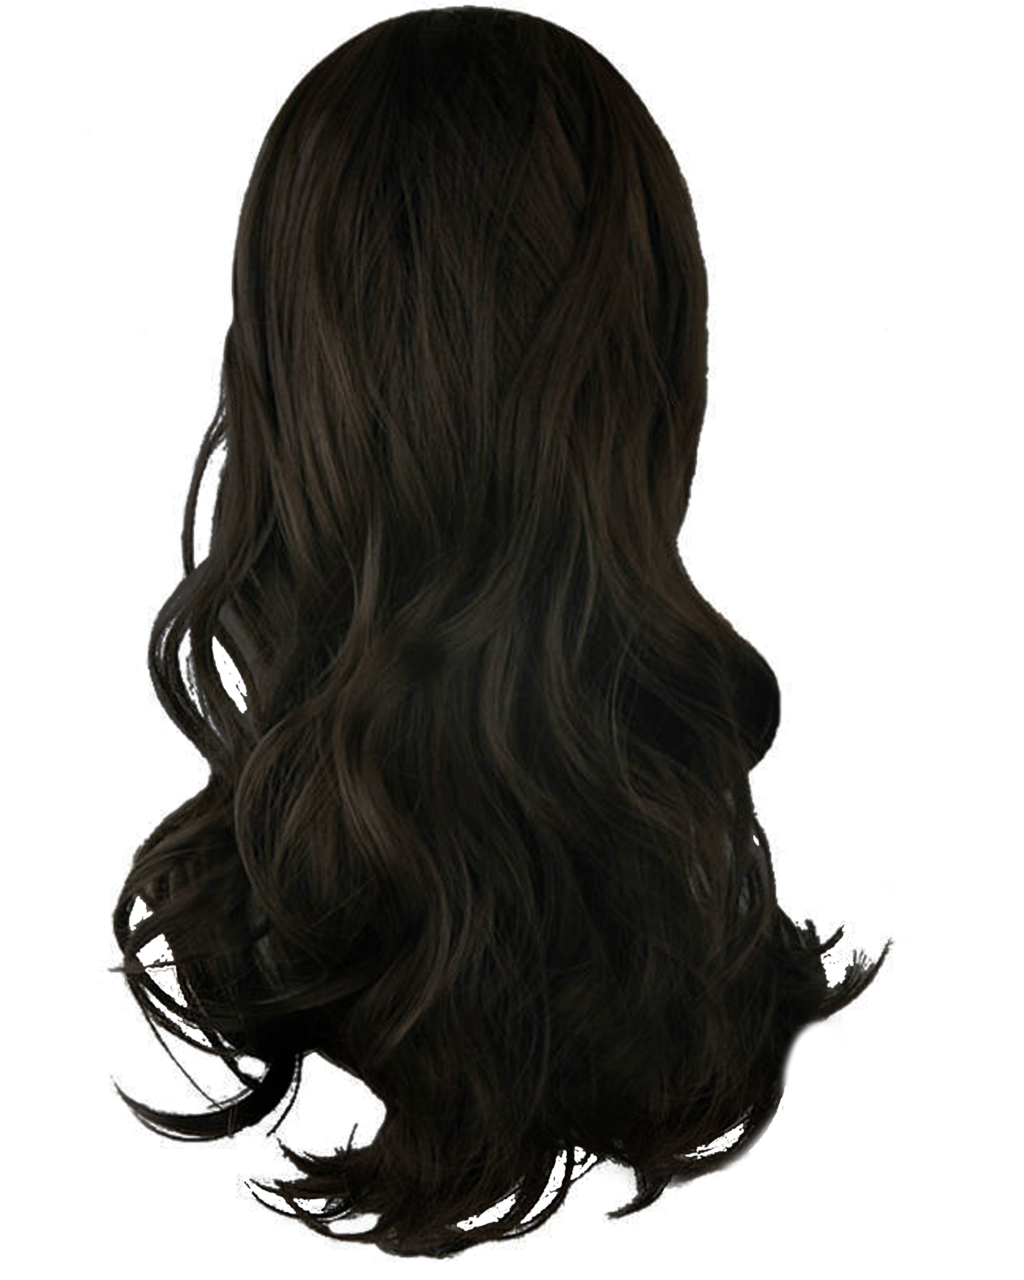 Hair Png - Search and download free hd hair png images with transparent